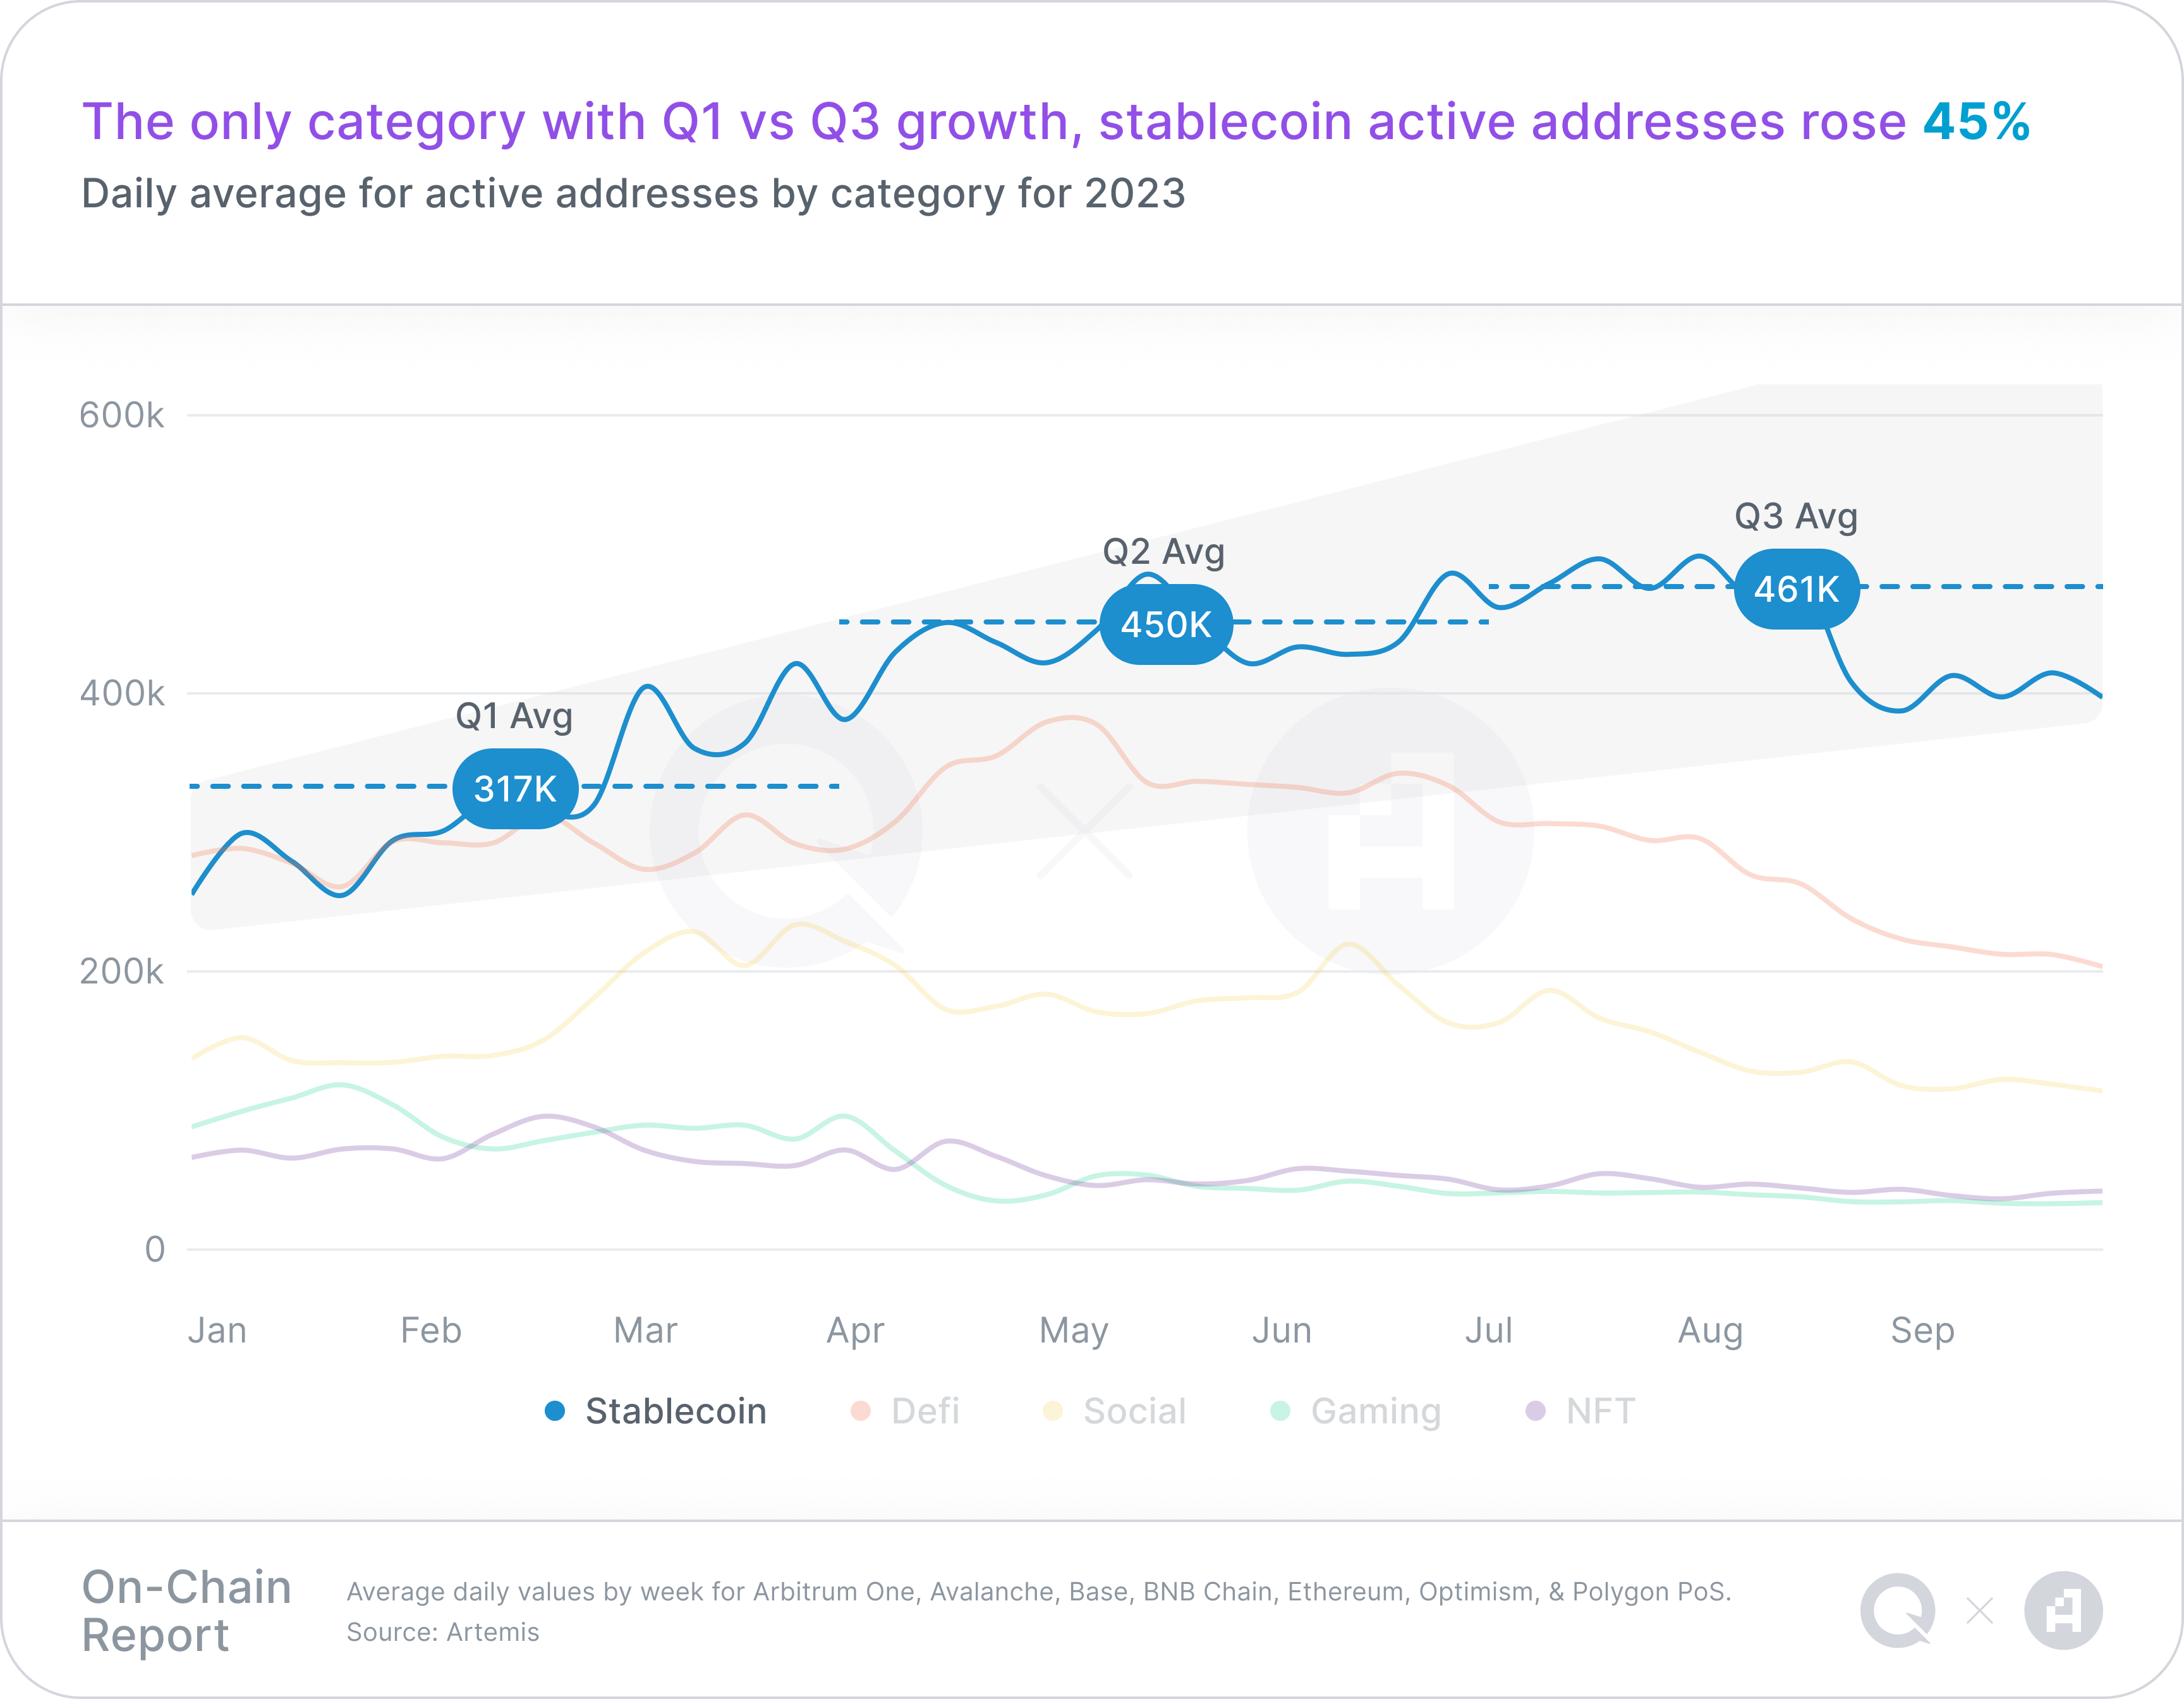 A chart representing daily average for active addresses by category for 2023, with a takeaway headline of "The only category with Q1 vs Q3 growth, stablecoin active addresses rose 45%"